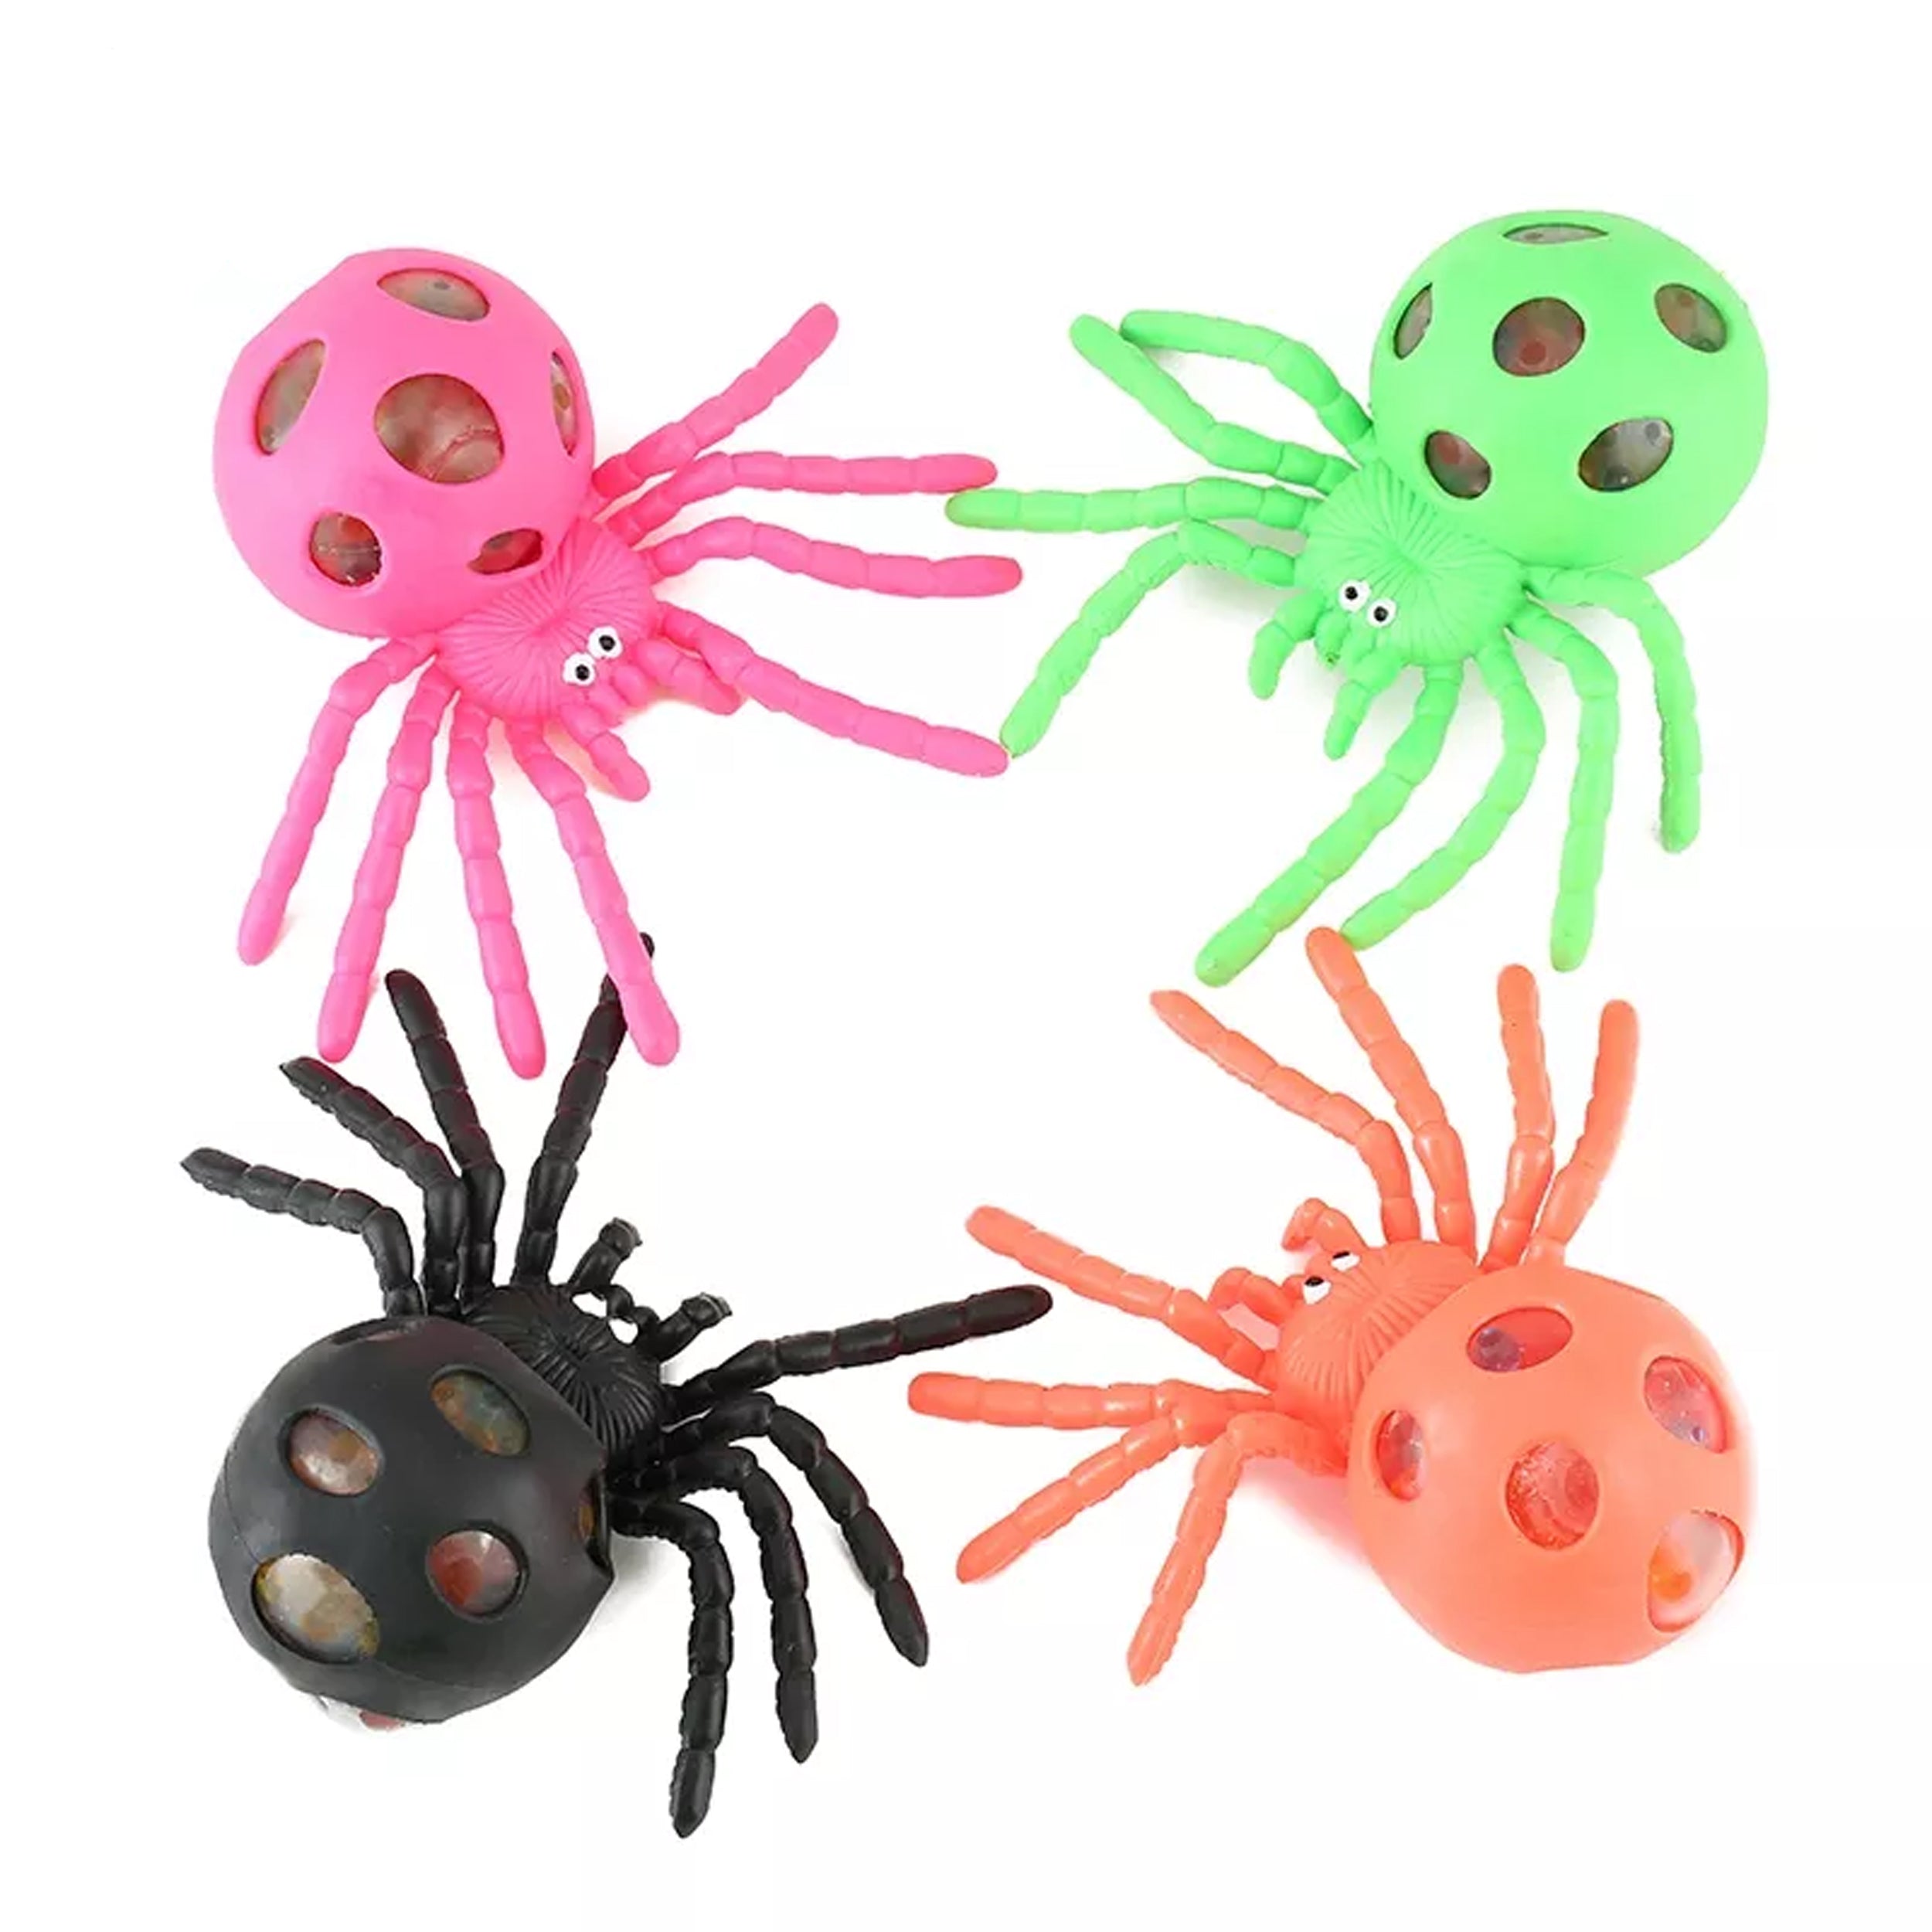 Spider Vent Squishy Squeeze Ball